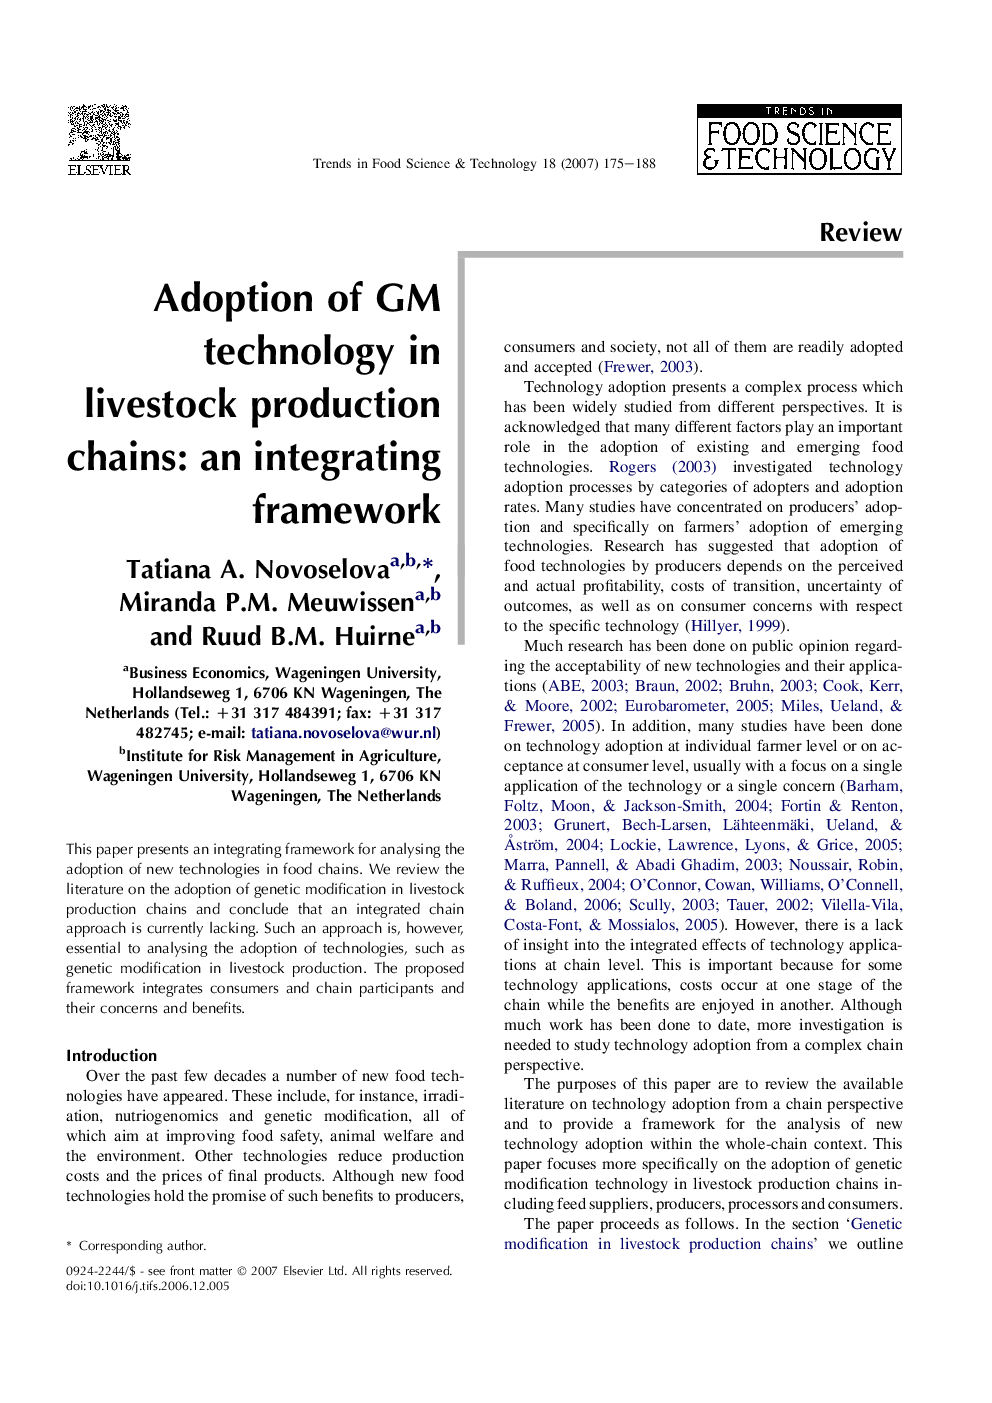 Adoption of GM technology in livestock production chains: an integrating framework